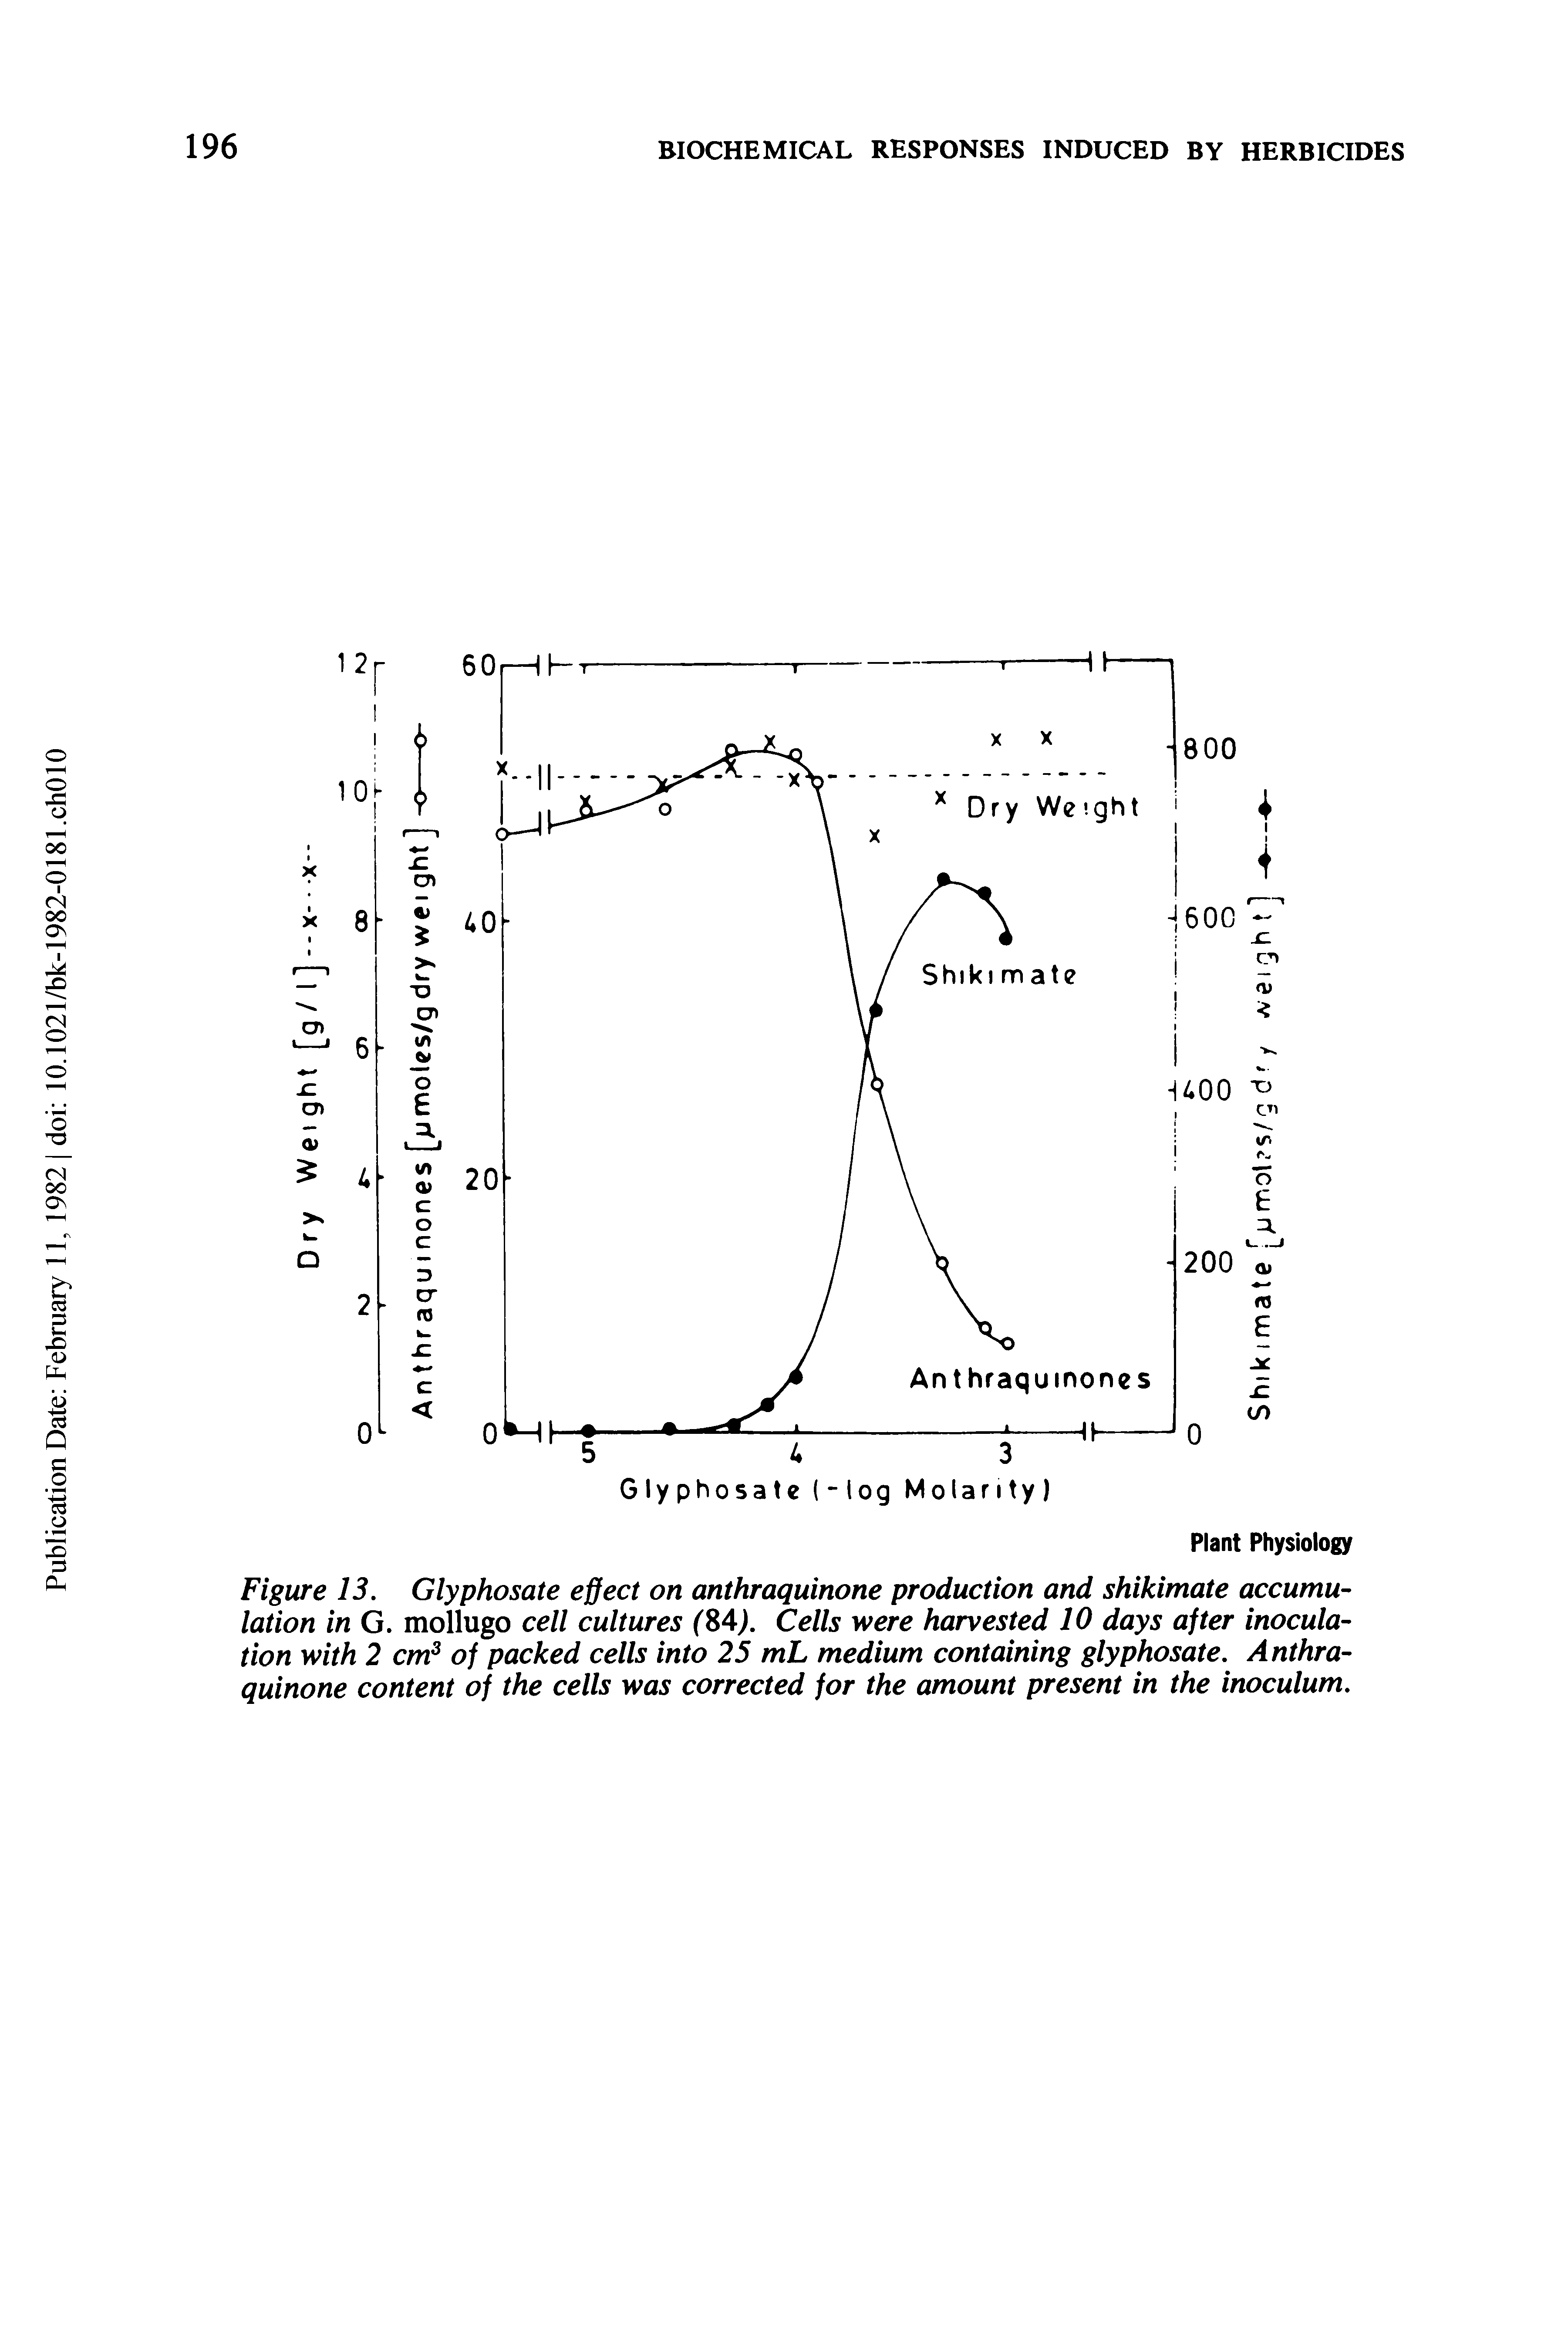 Figure 13. Glyphosate effect on anthraquinone production and shikimate accumulation in G. mollugo cell cultures ( 84j. Cells were harvested 10 days after inoculation with 2 cm of packed cells into 25 mL medium containing glyphosate. Anthraquinone content of the cells was corrected for the amount present in the inoculum.